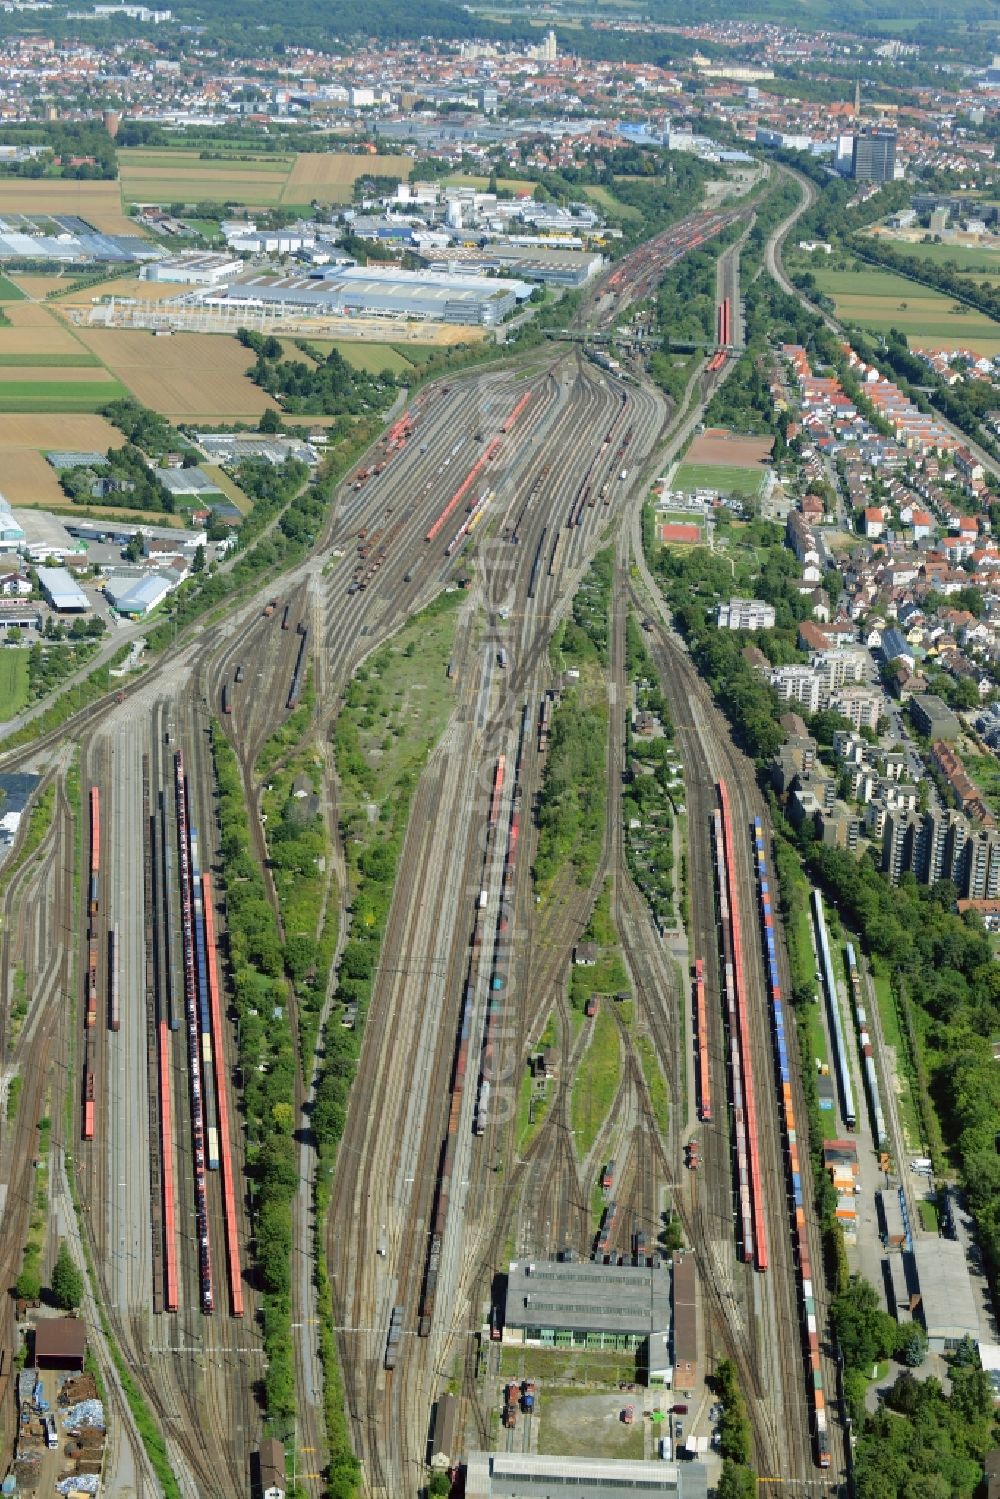 Aerial image Kornwestheim - Marshalling yard and freight station of the Deutsche Bahn in Kornwestheim in the state of Baden-Wuerttemberg. The yard is the second largest of the state